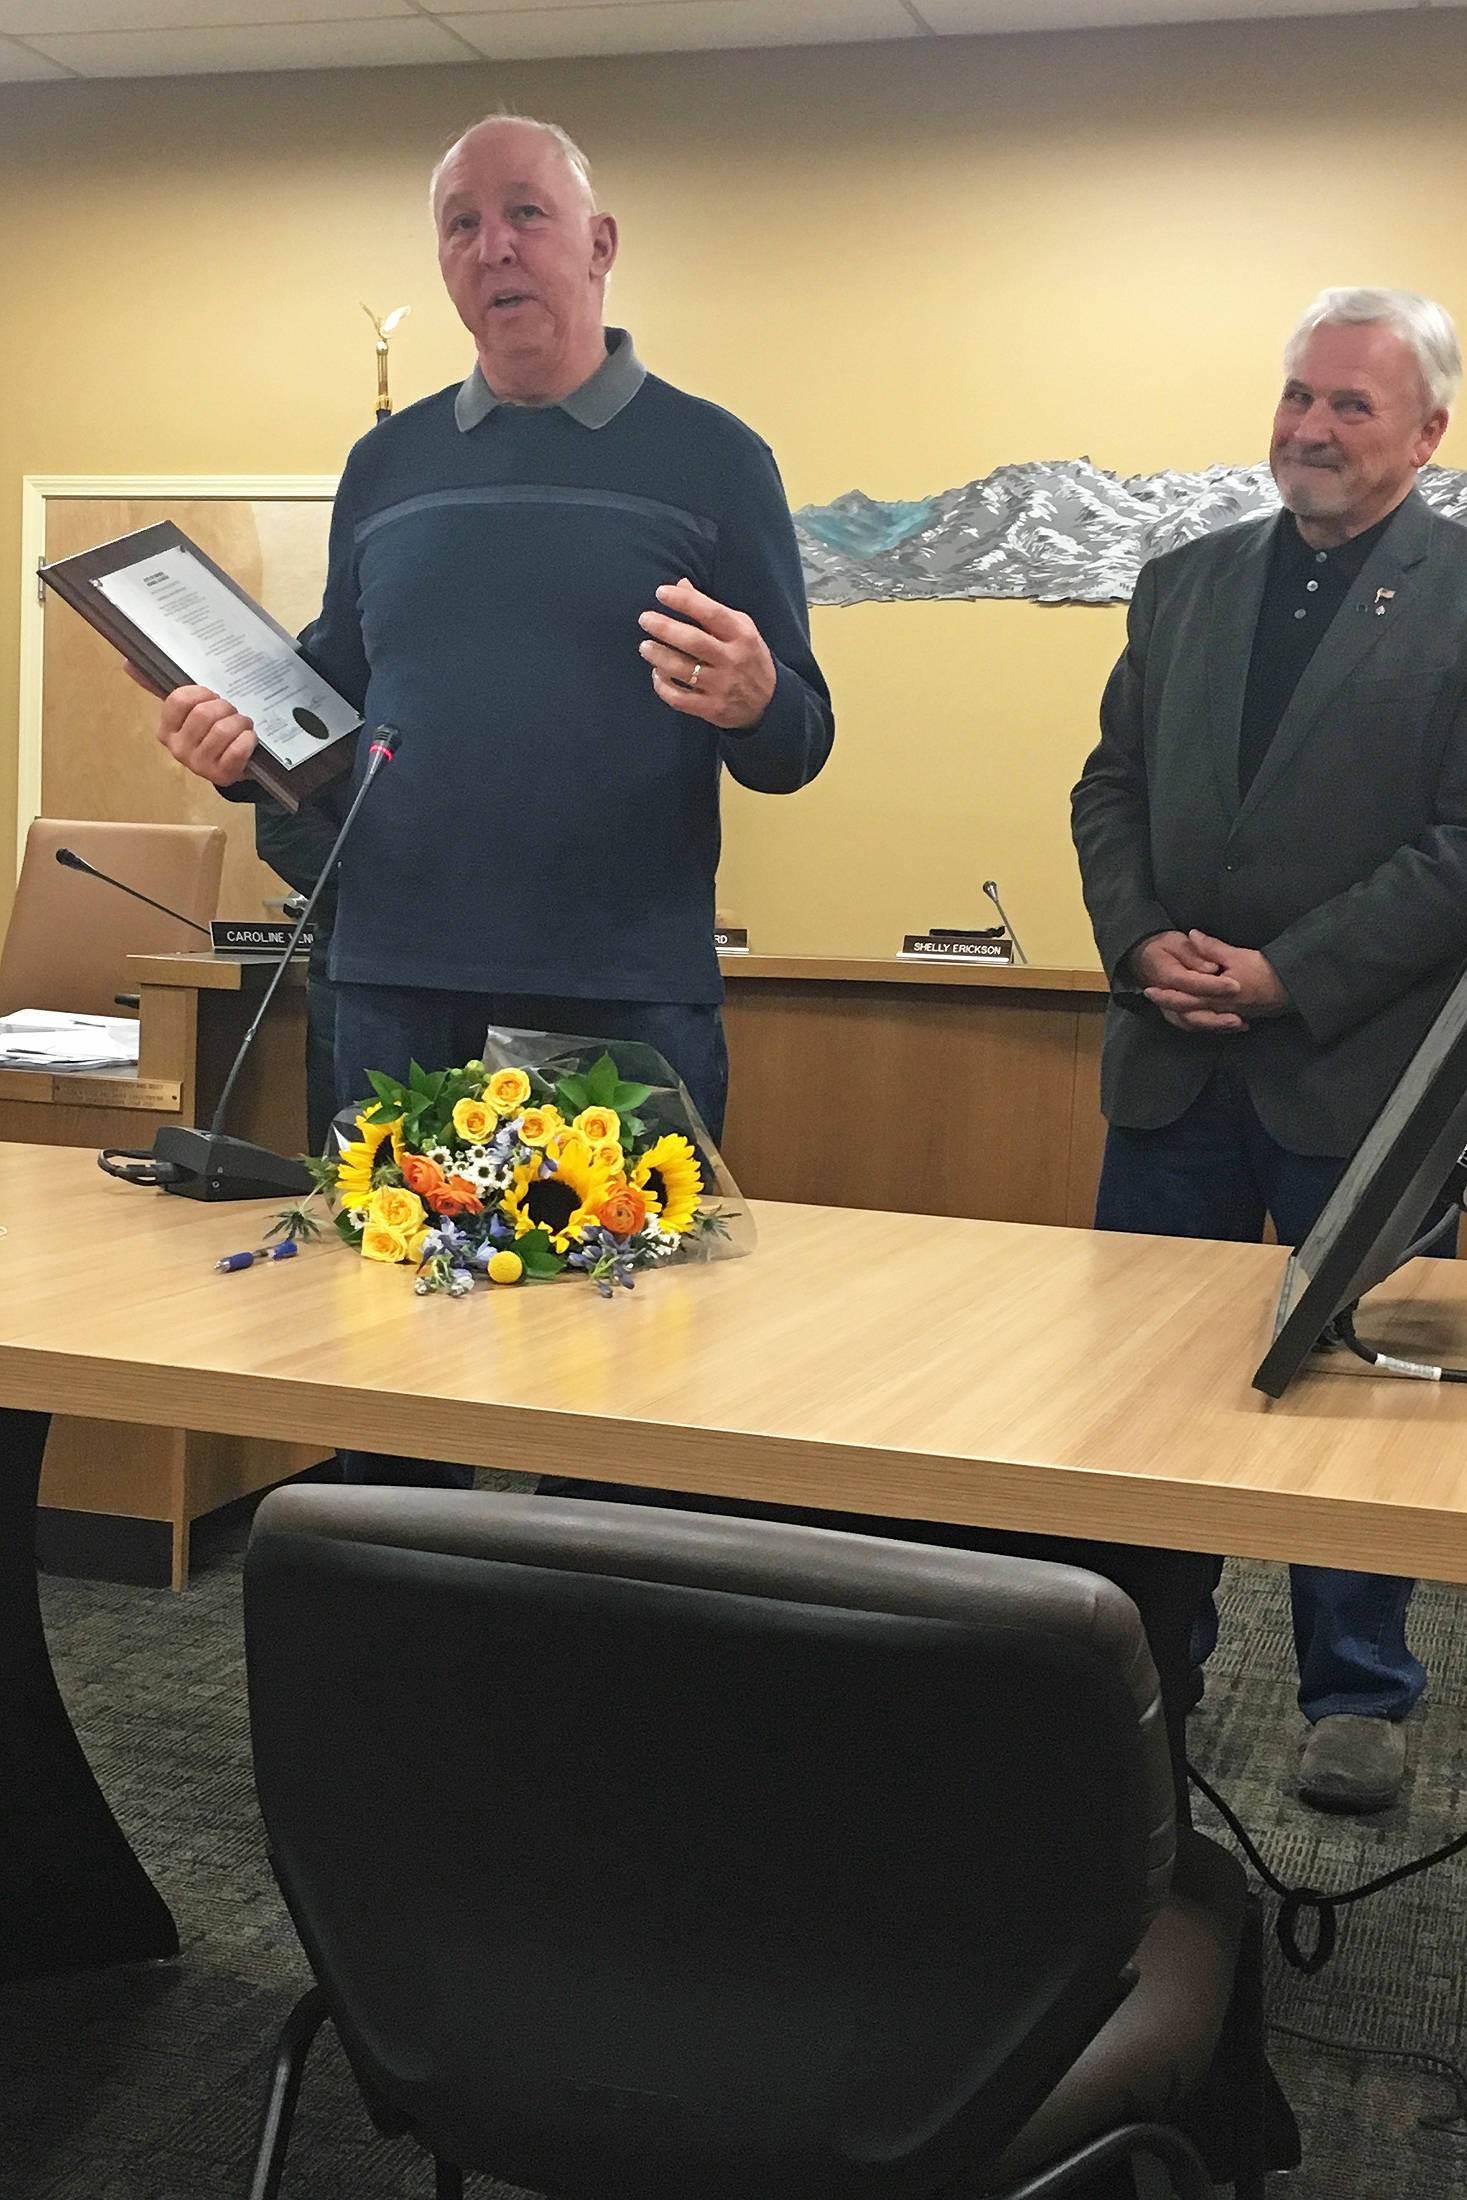 Former Homer Mayor Bryan Zak speaks after receiving an official recognition for his time serving the city at the Monday, Nov. 26, 2018 Homer City Council meeting at Homer City Hall in Homer, Alaska. Zak was also presented with a quilt of valor from the Kachemak Bay Quilters in honor of his 20 years of service with the U.S. Air Force. (Photo by Megan Pacer/Homer News)